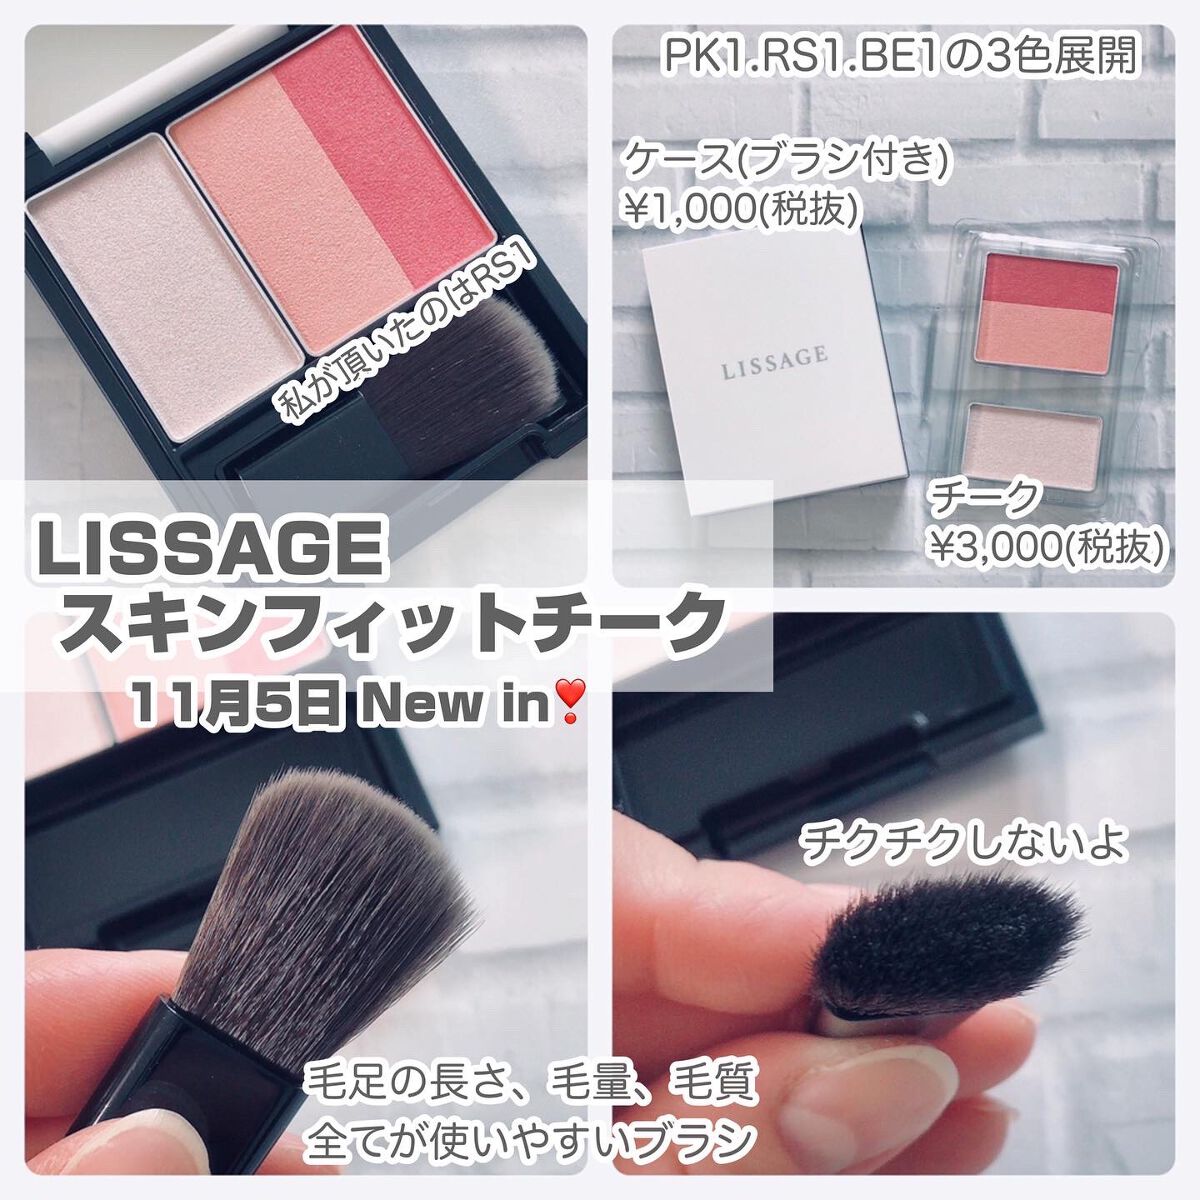 LISSAGE スキンフィットチーク ケース付き